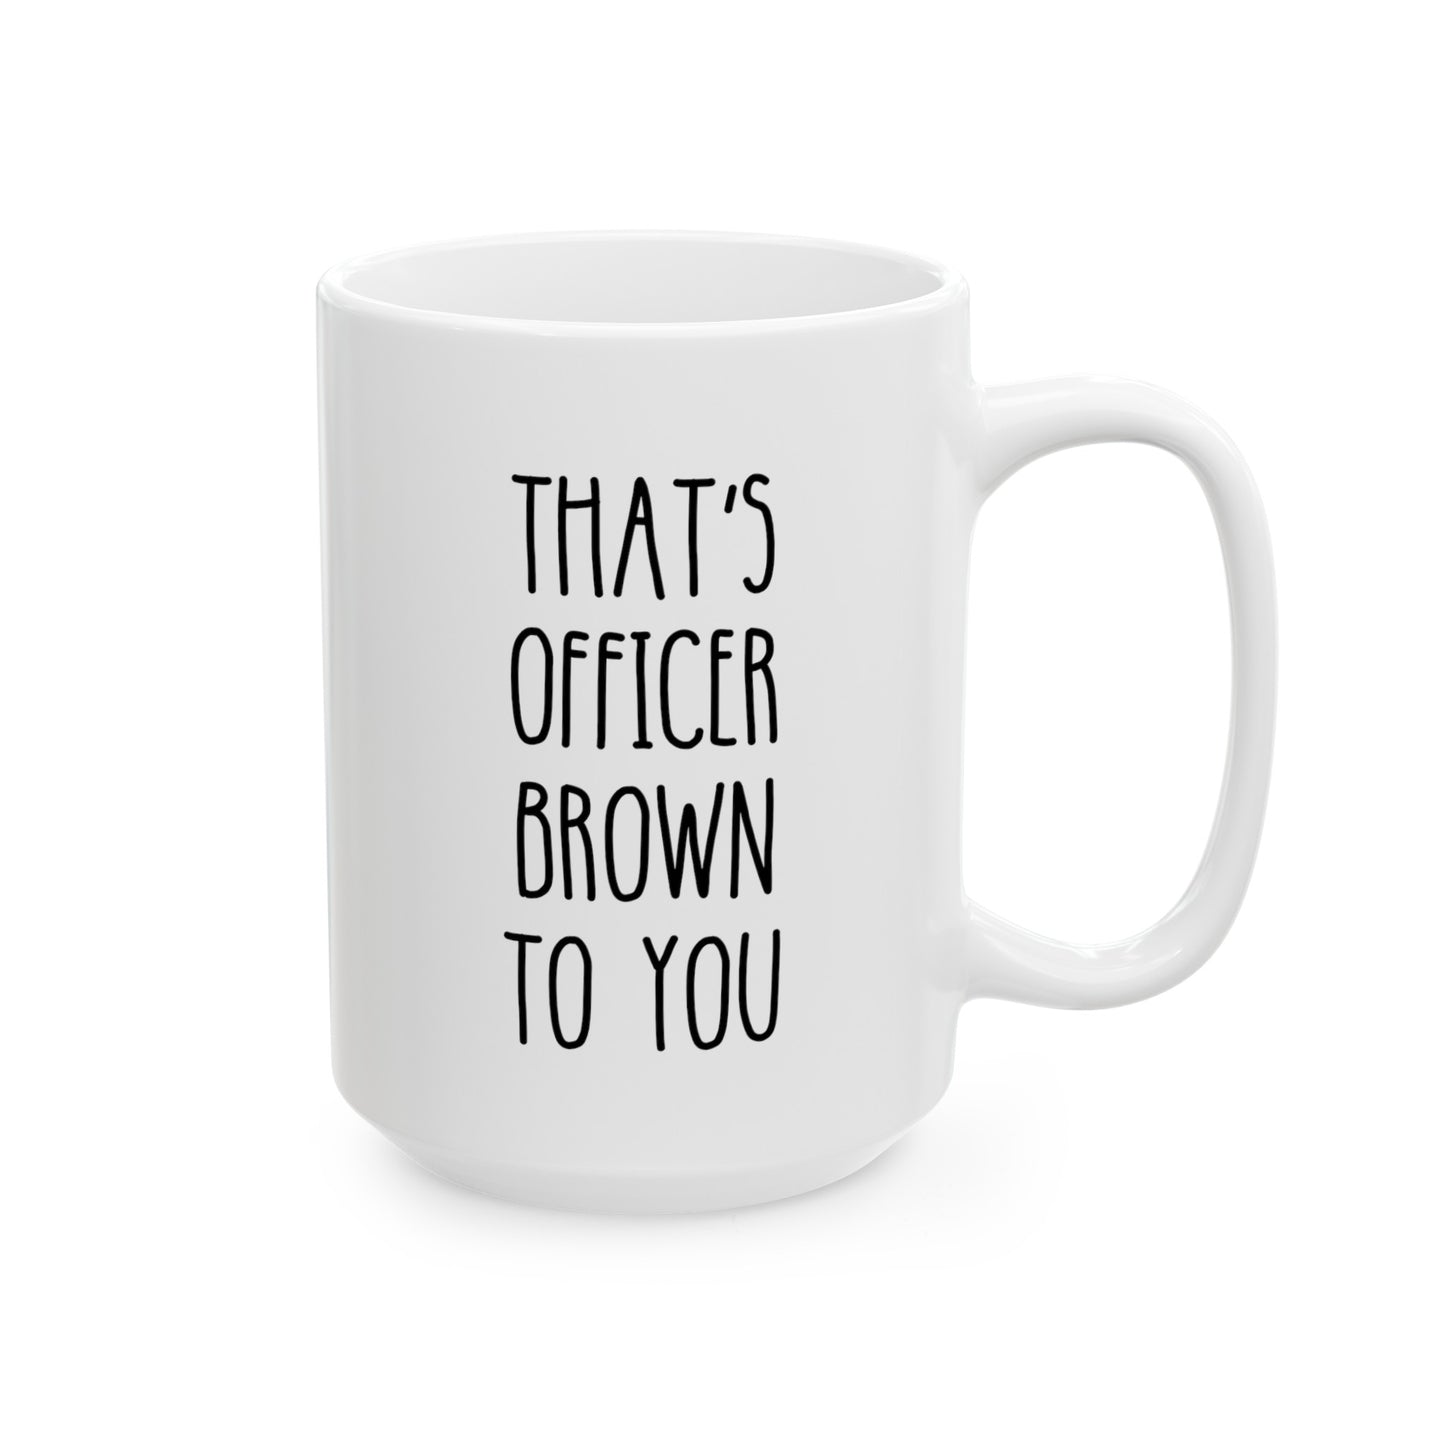 That's Officer To You 15oz white funny large coffee mug gift for cop police sergeant custom name appreciation personalize policeman promotion waveywares wavey wares wavywares wavy wares